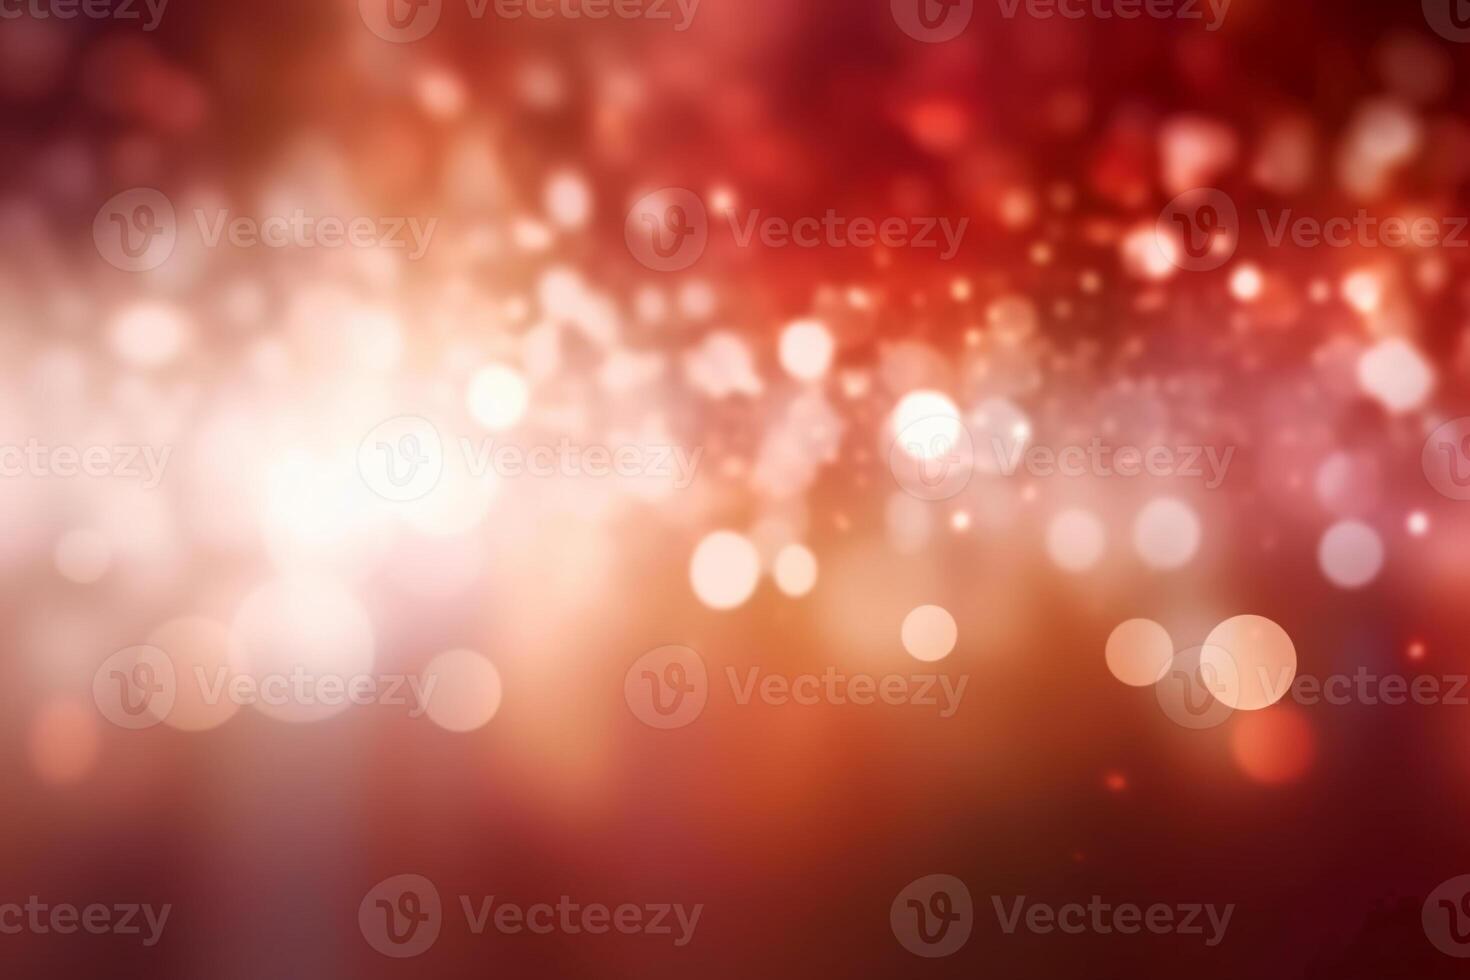 A blurred white light, red light abstract background with bokeh glow, Illustration. photo